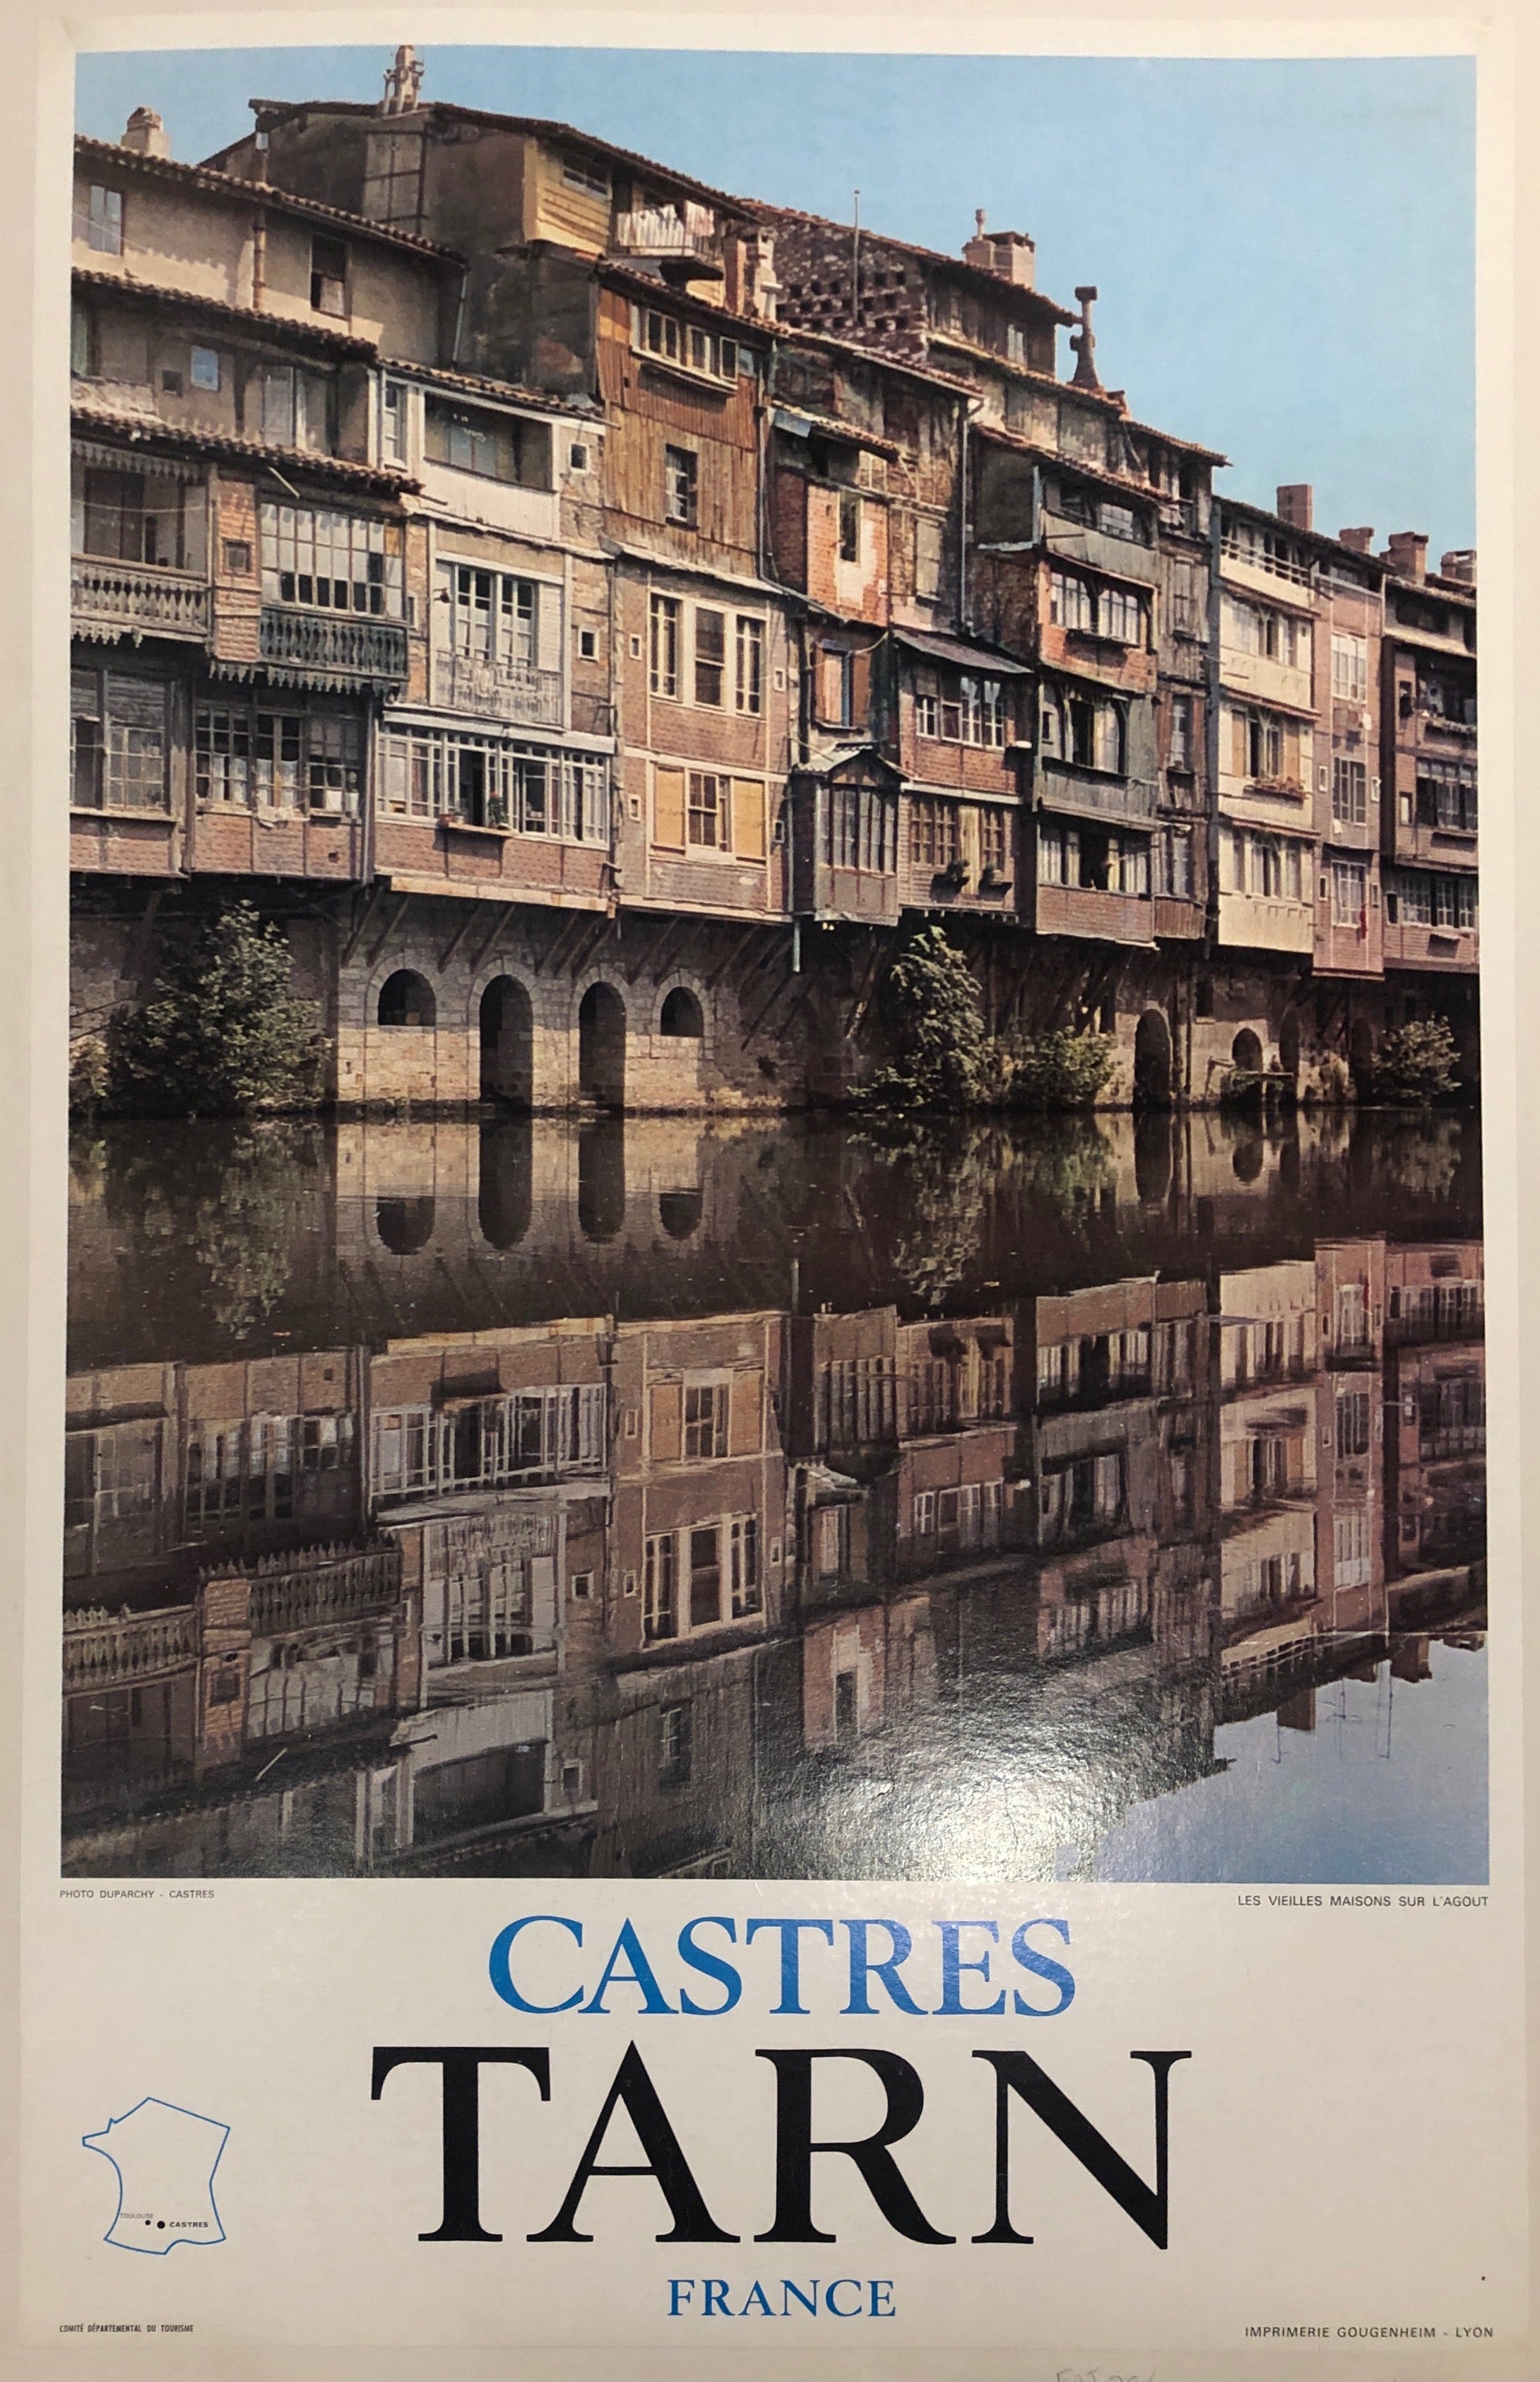 Poster featuring a photograph of old apartments in Castres, France